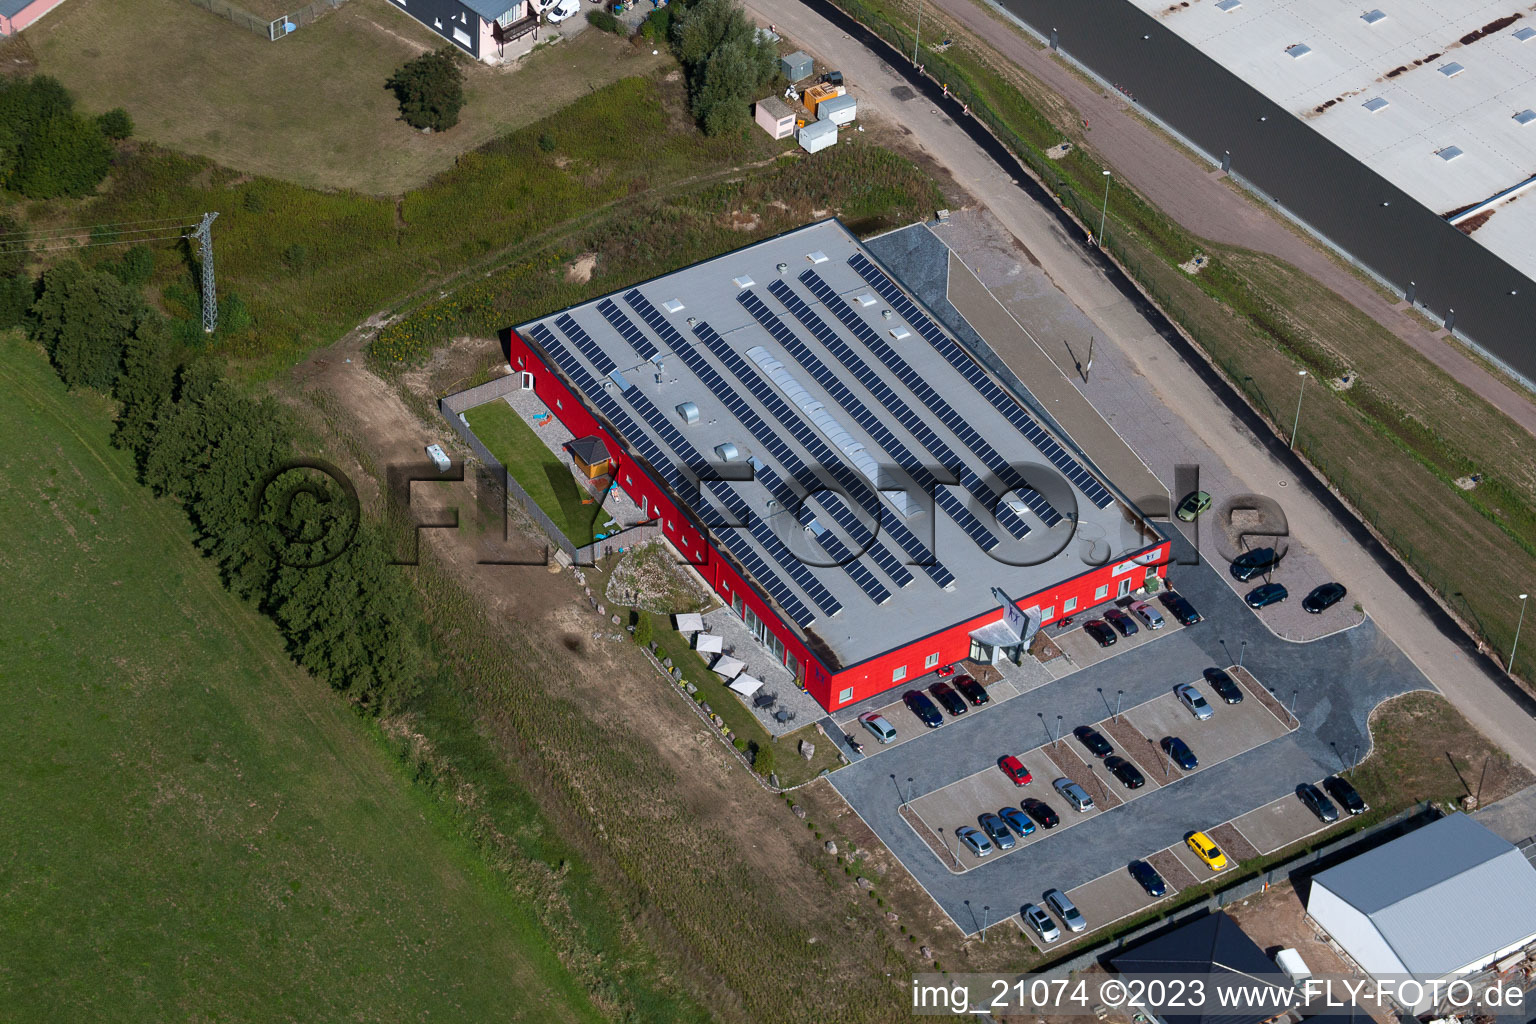 Aerial view of Bienwald Fitness World in the district Minderslachen in Kandel in the state Rhineland-Palatinate, Germany